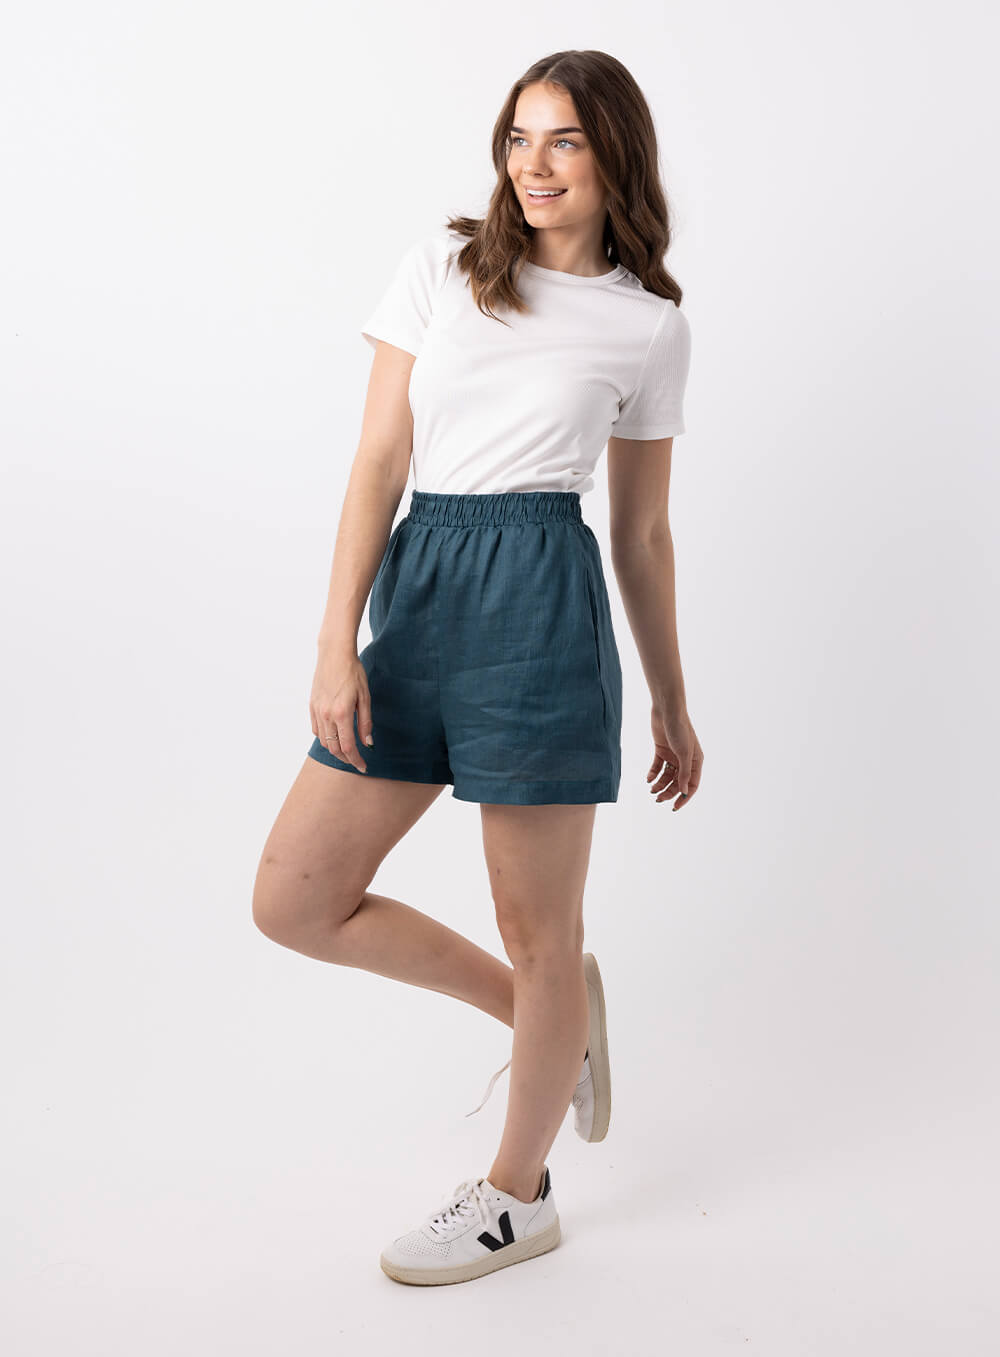 The Ali Linen Short in teal is 100% breathable lien, mid thigh in length with 2 side pockets, no back pockets, elastic waistband and designed to be worn high wiasted and loose fitting